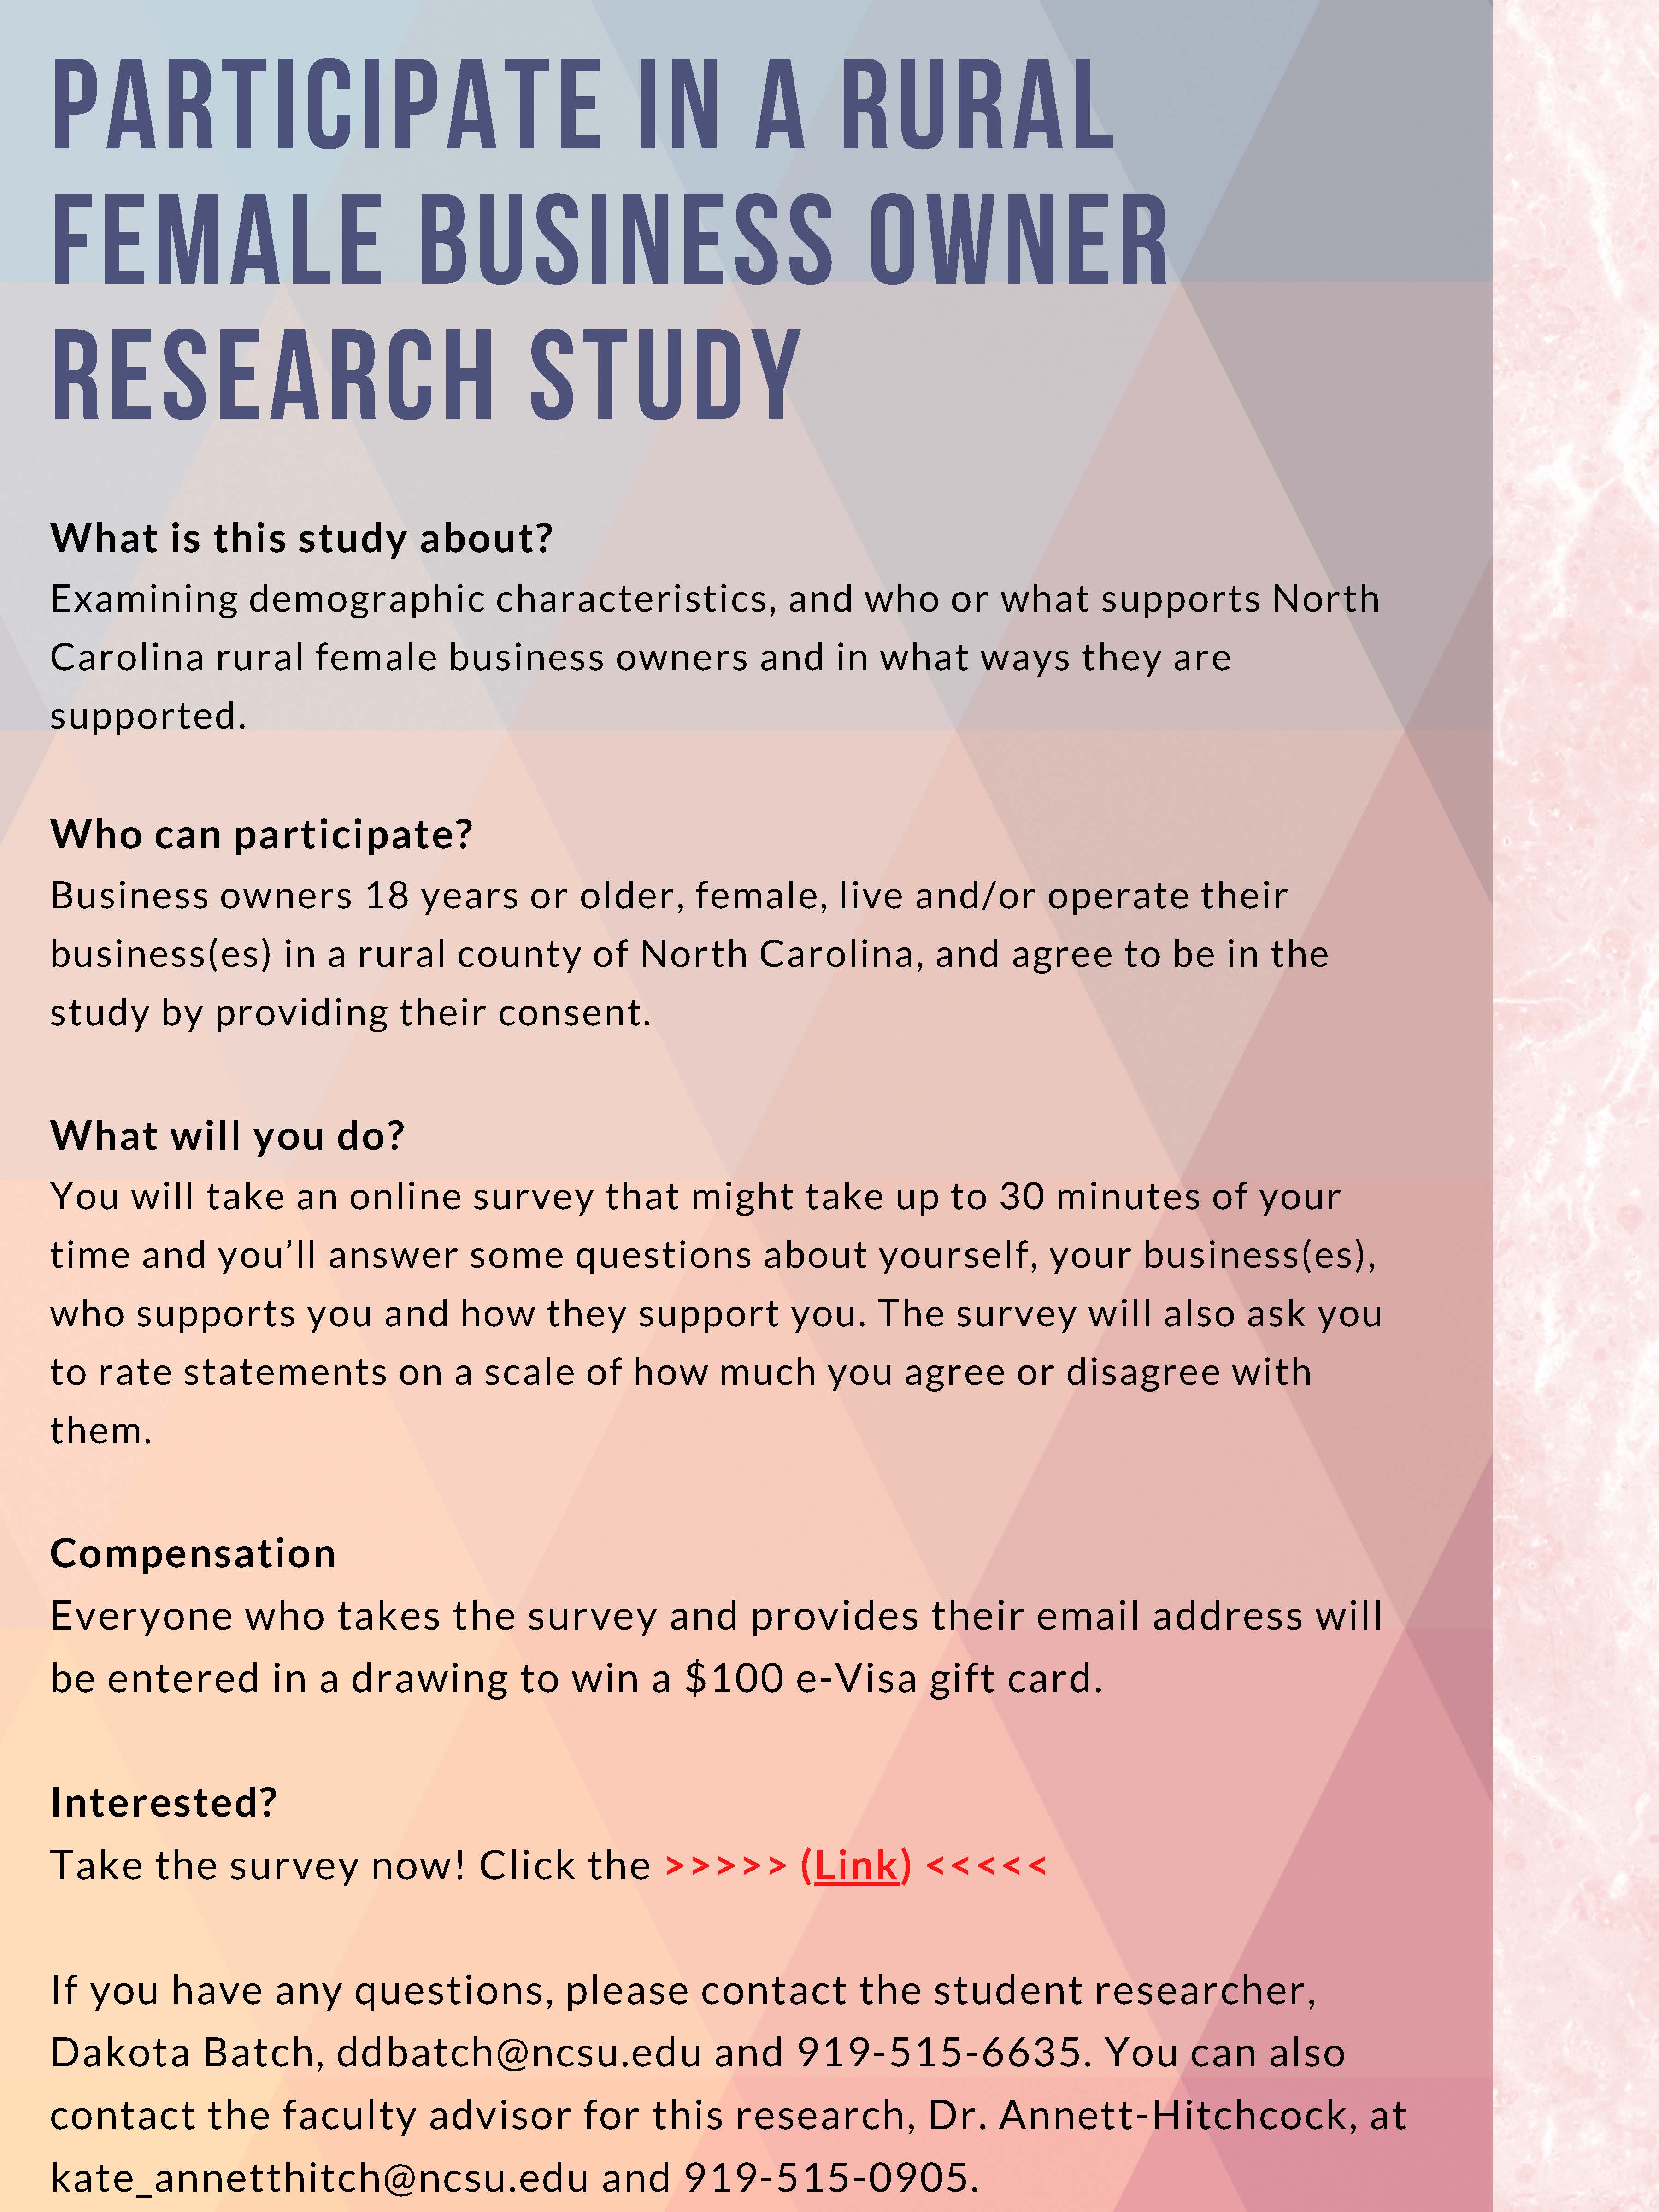 Research study flyer